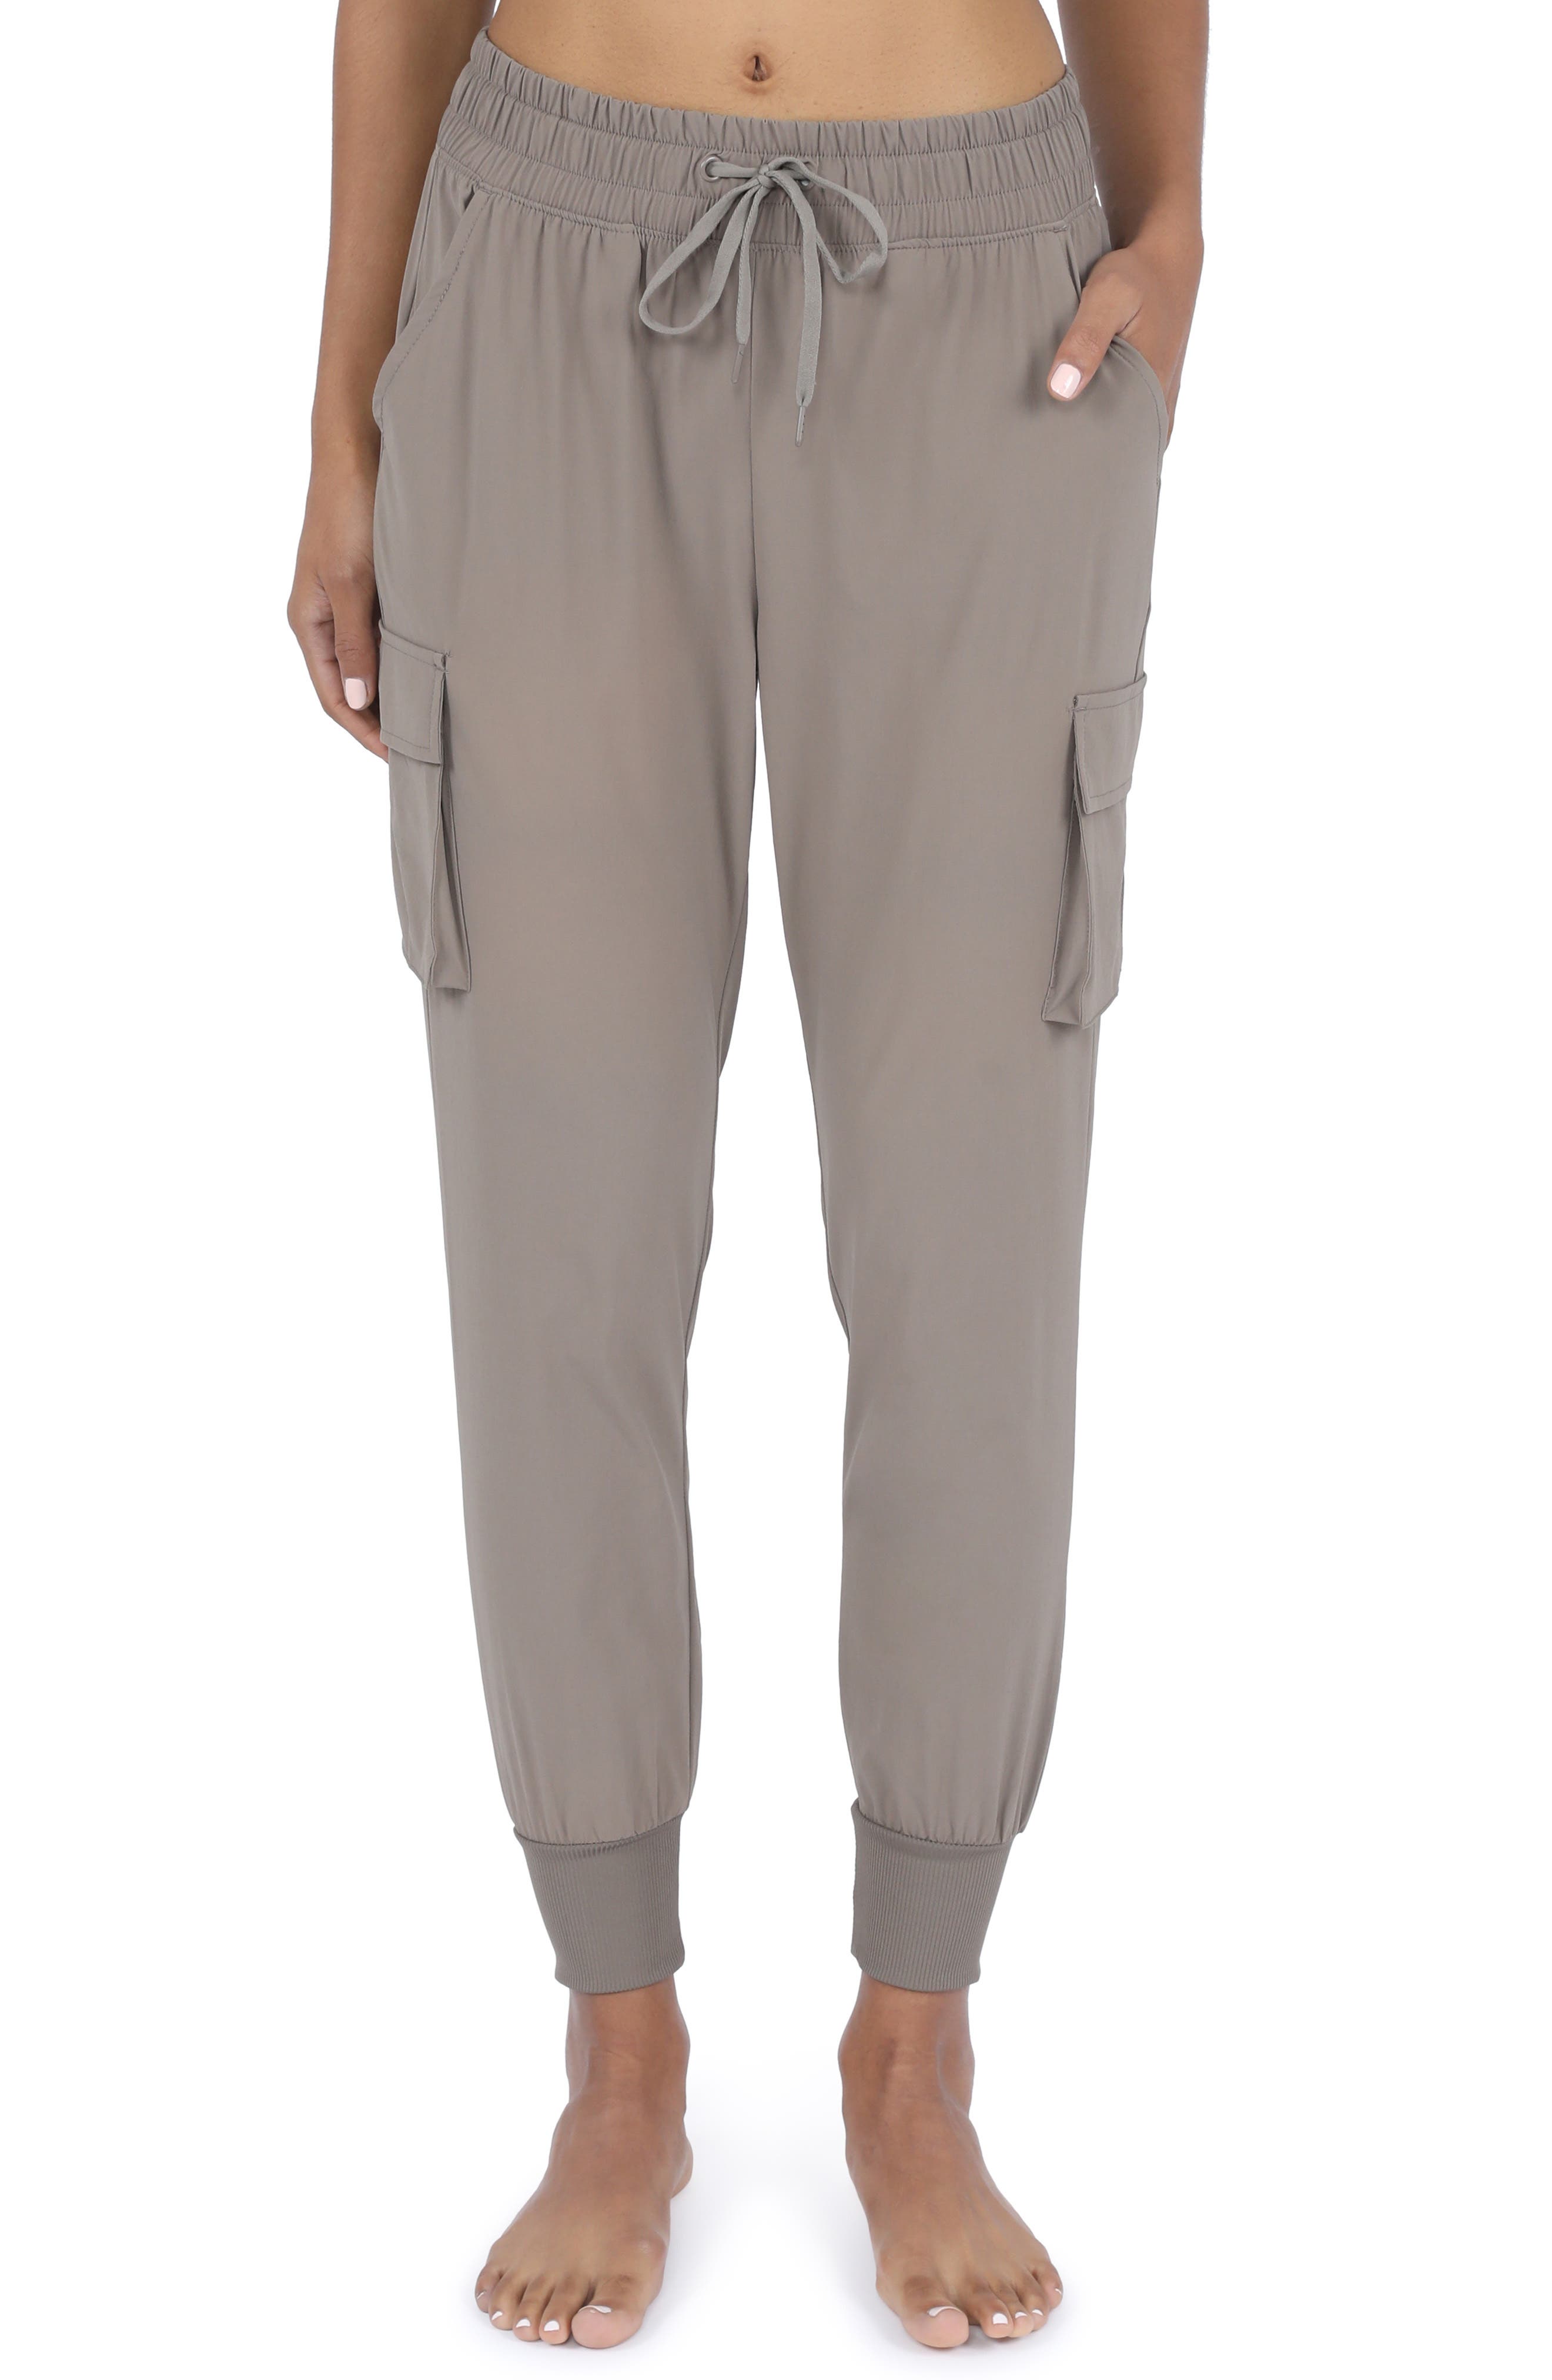 Woven Cargo Joggers 90 Degree By Reflex